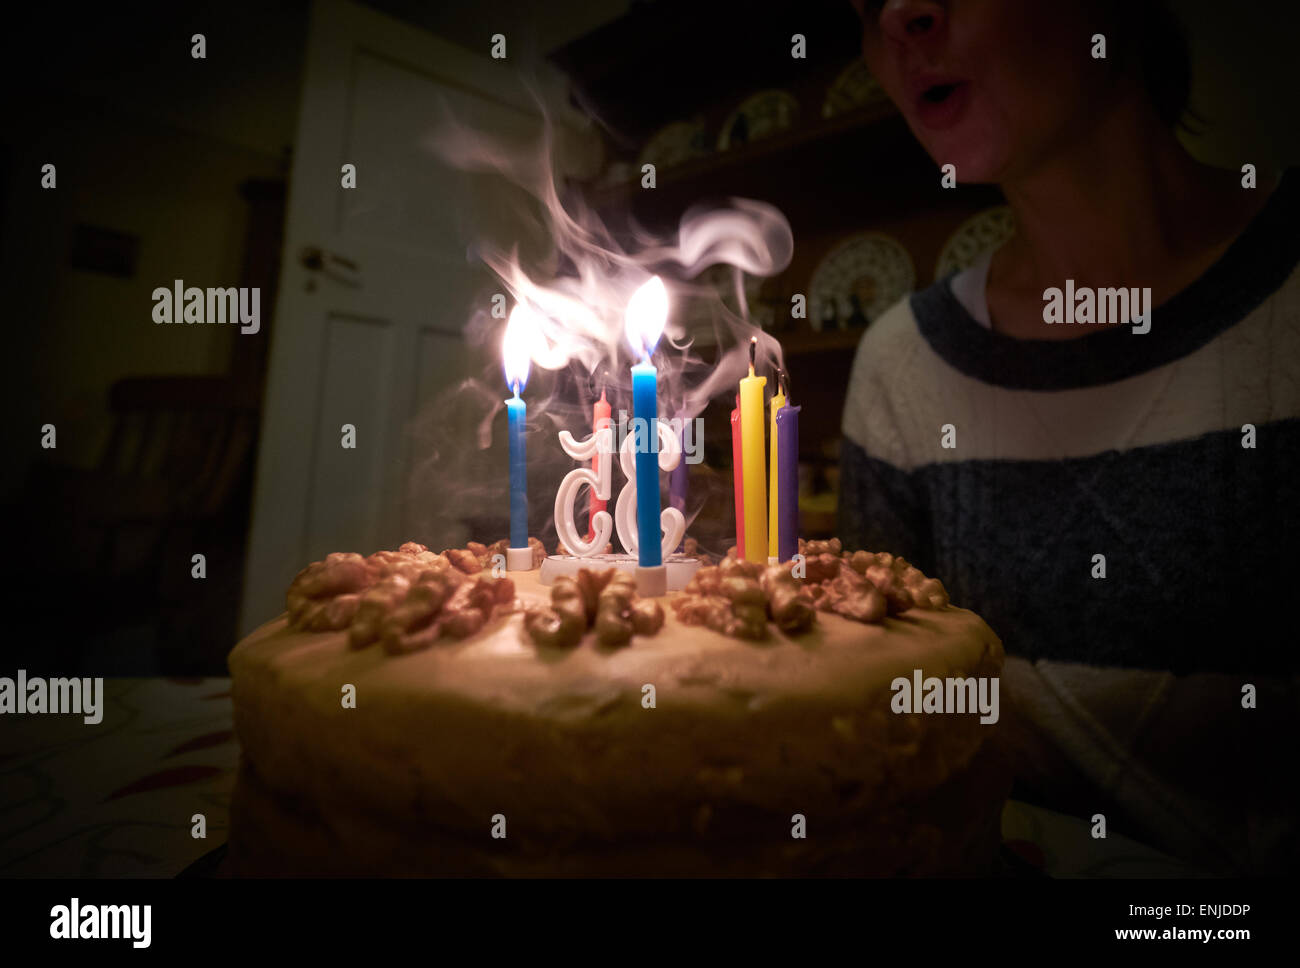 A woman blowing out candles on her birthday cake. Instagram type styling applied some light grain added. Stock Photo